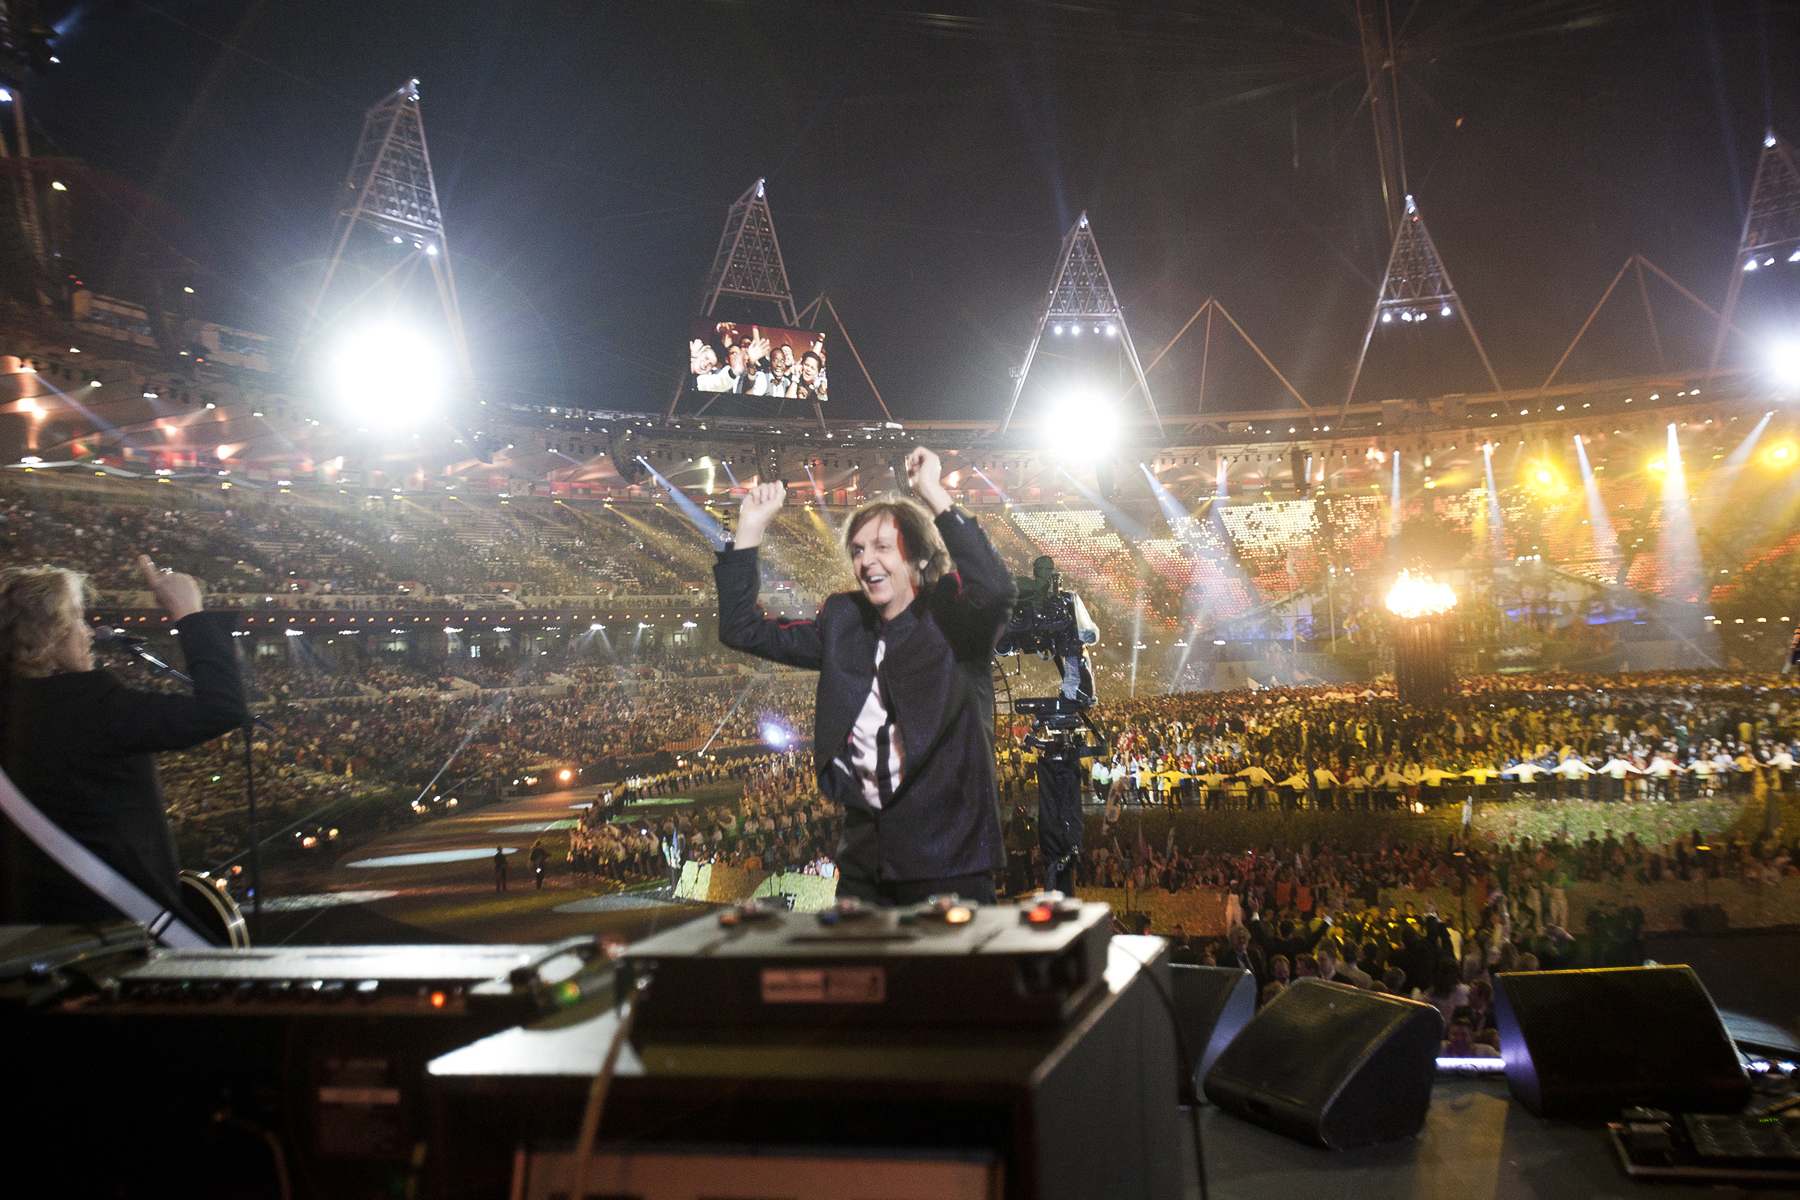 Paul McCartney performing at the Olympics